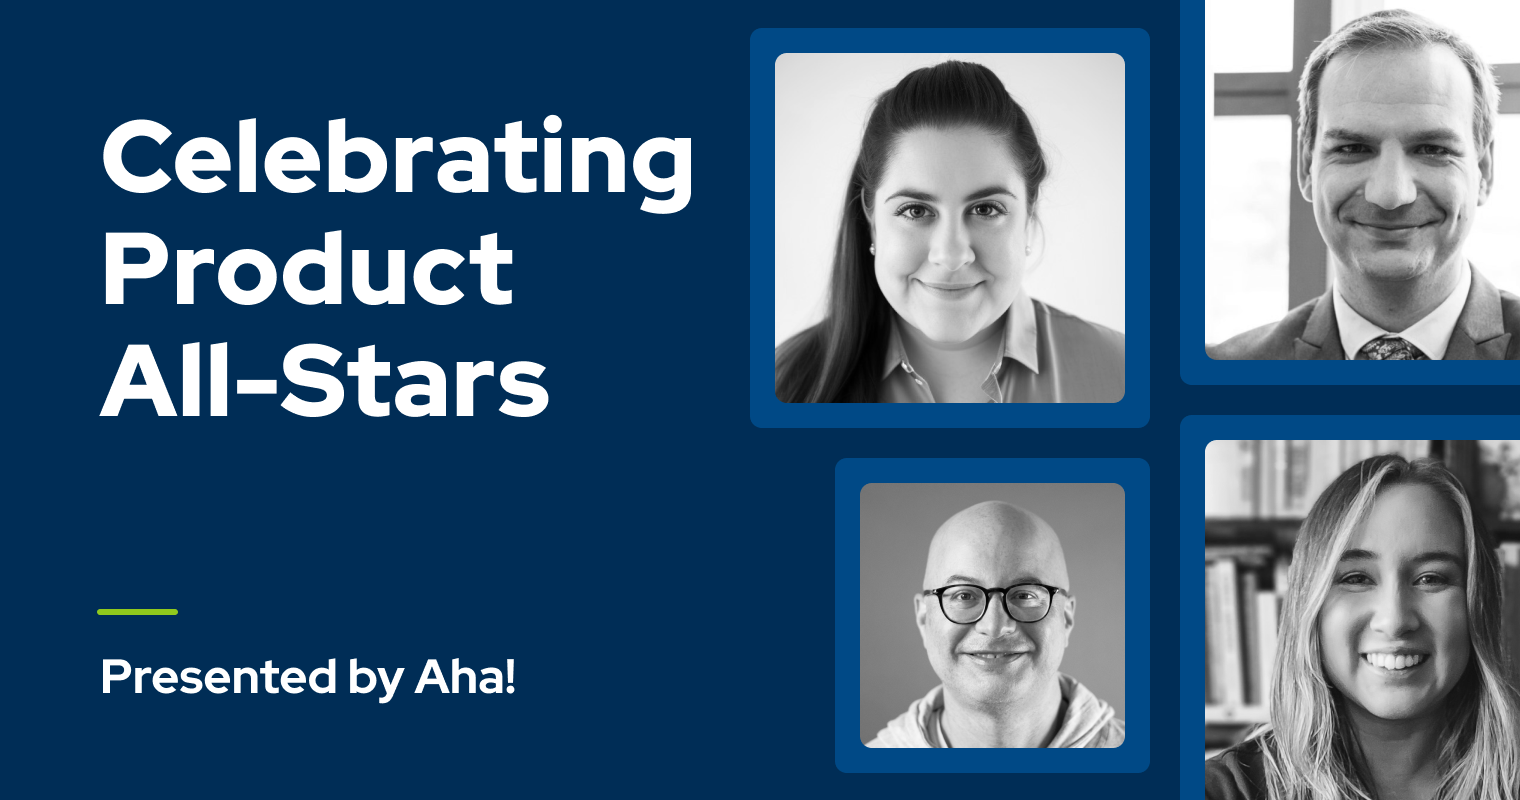 9 product leaders share their advice on product building